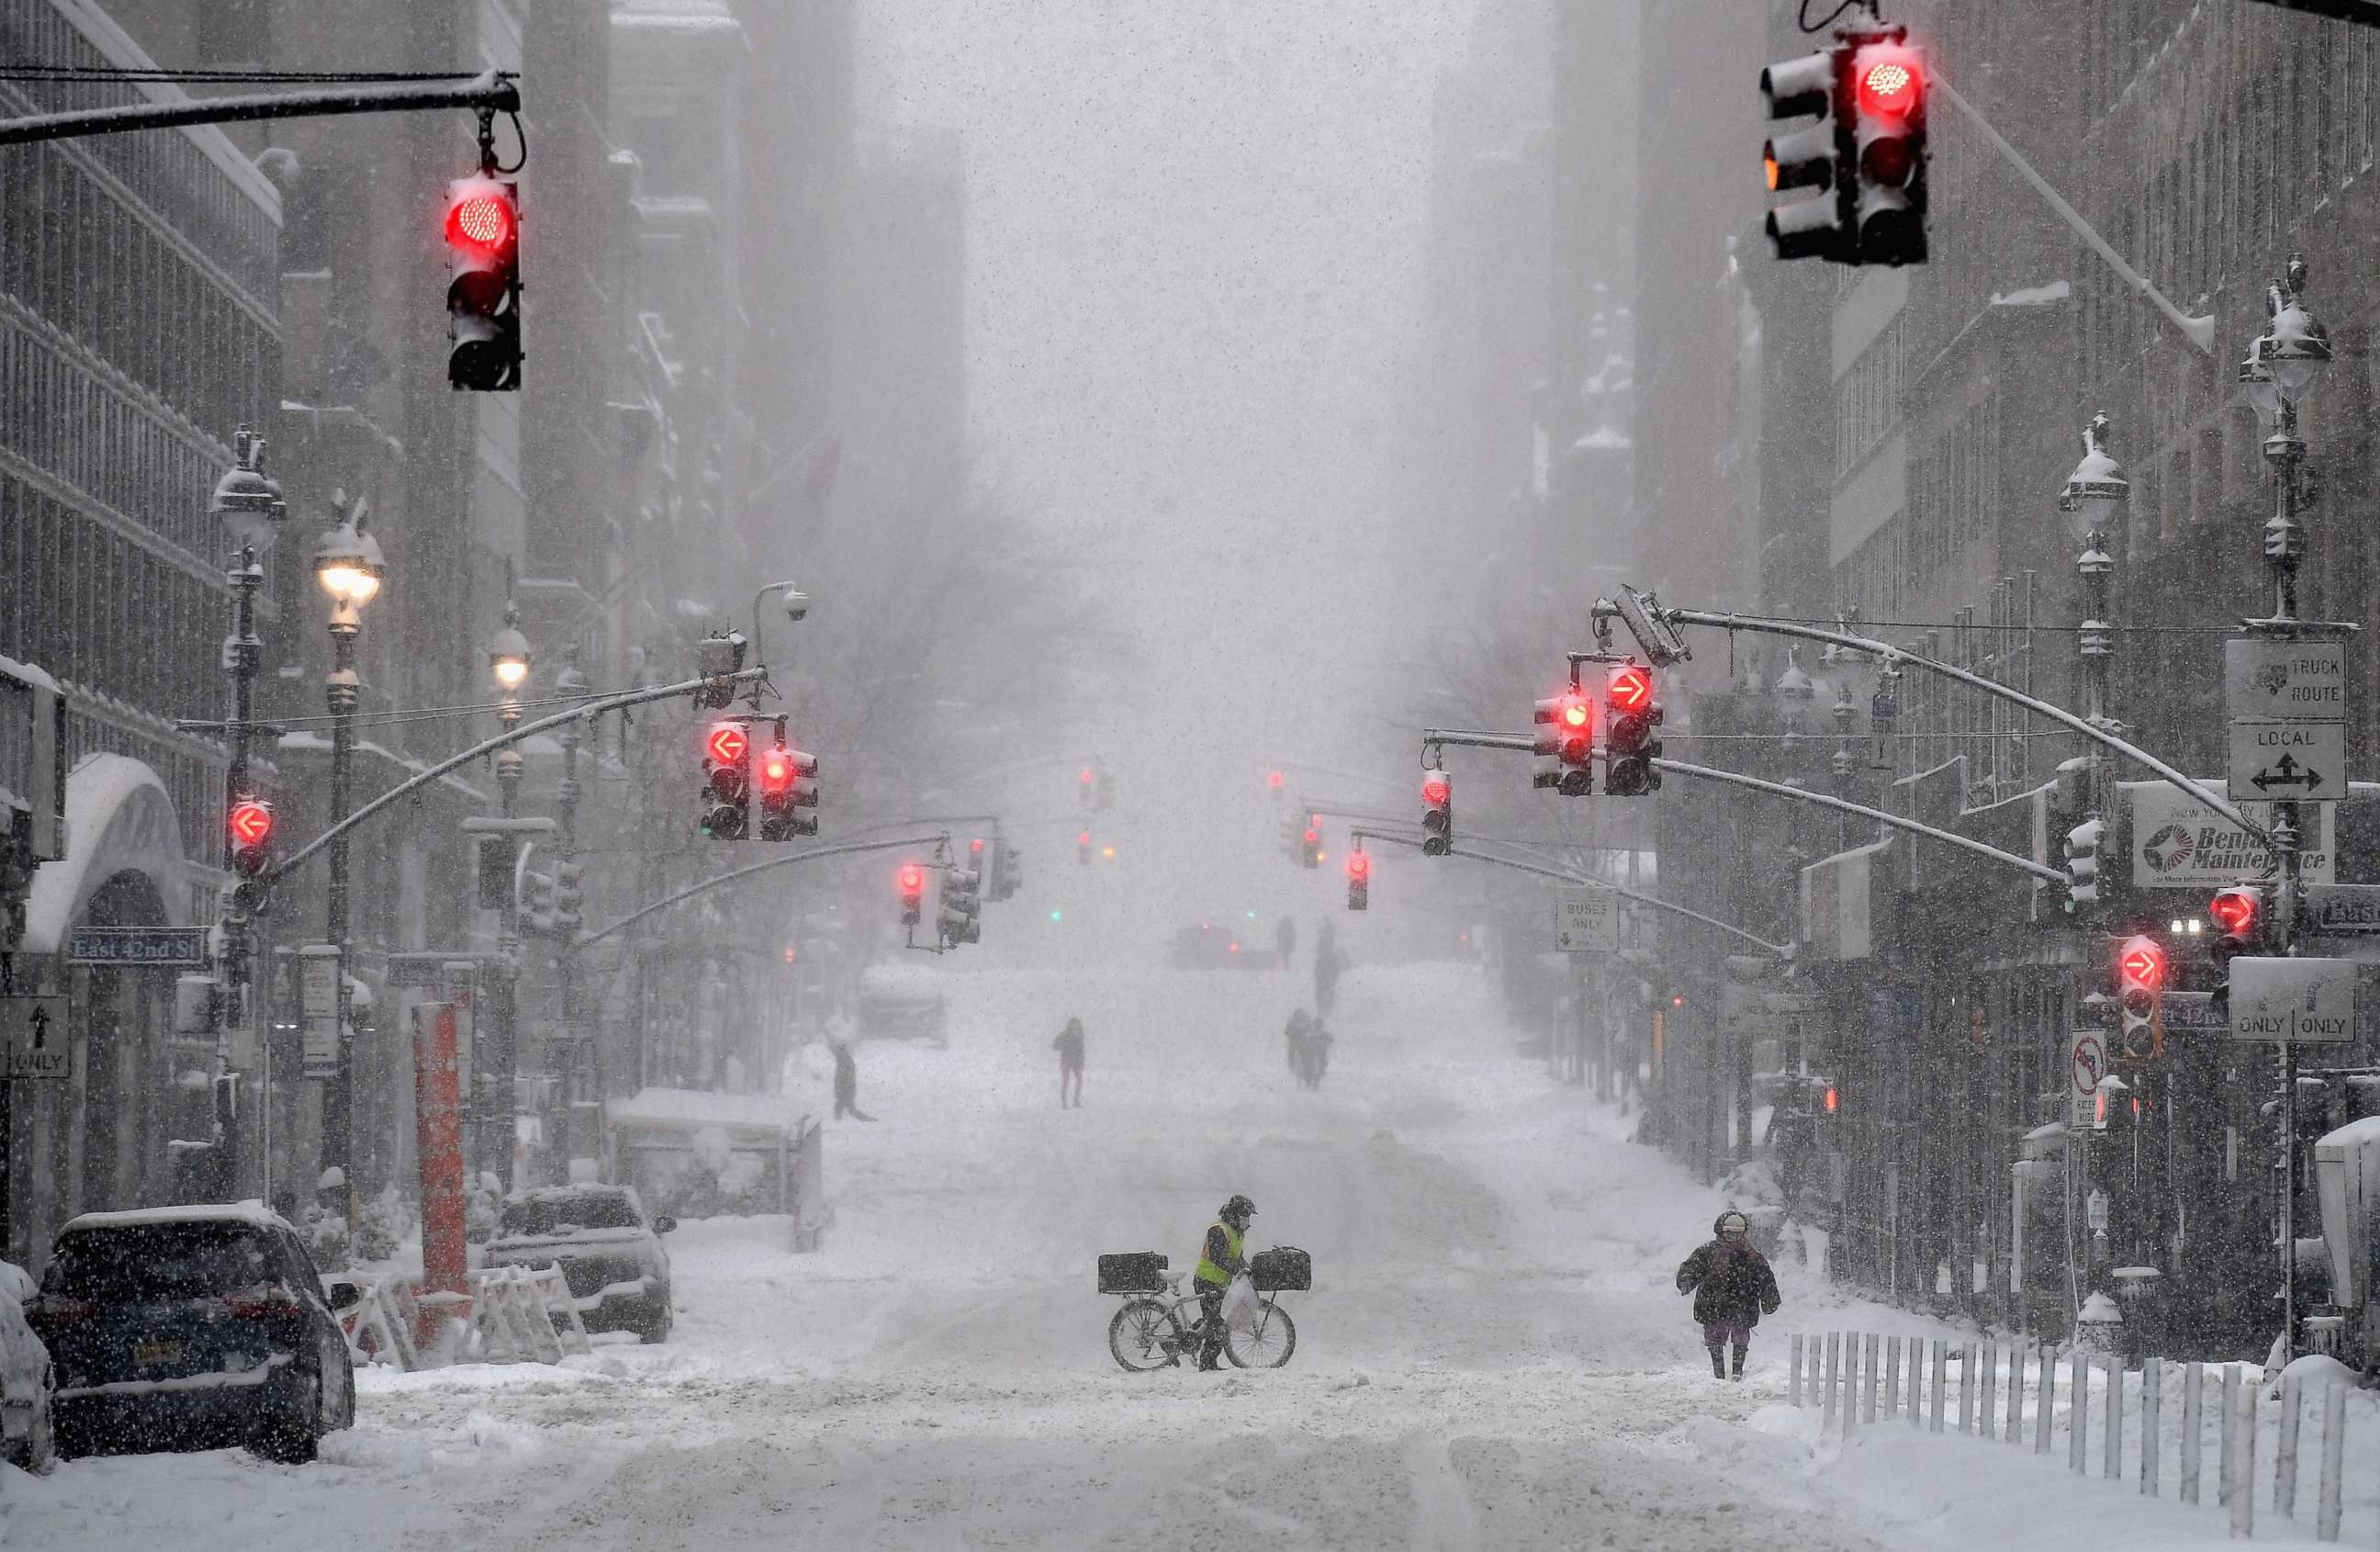 PHOTO: TOPSHOT - A street in New York City is covered in snow during a winter storm that also hit New Jersey and Connecticut on Feb. 1, 2021.